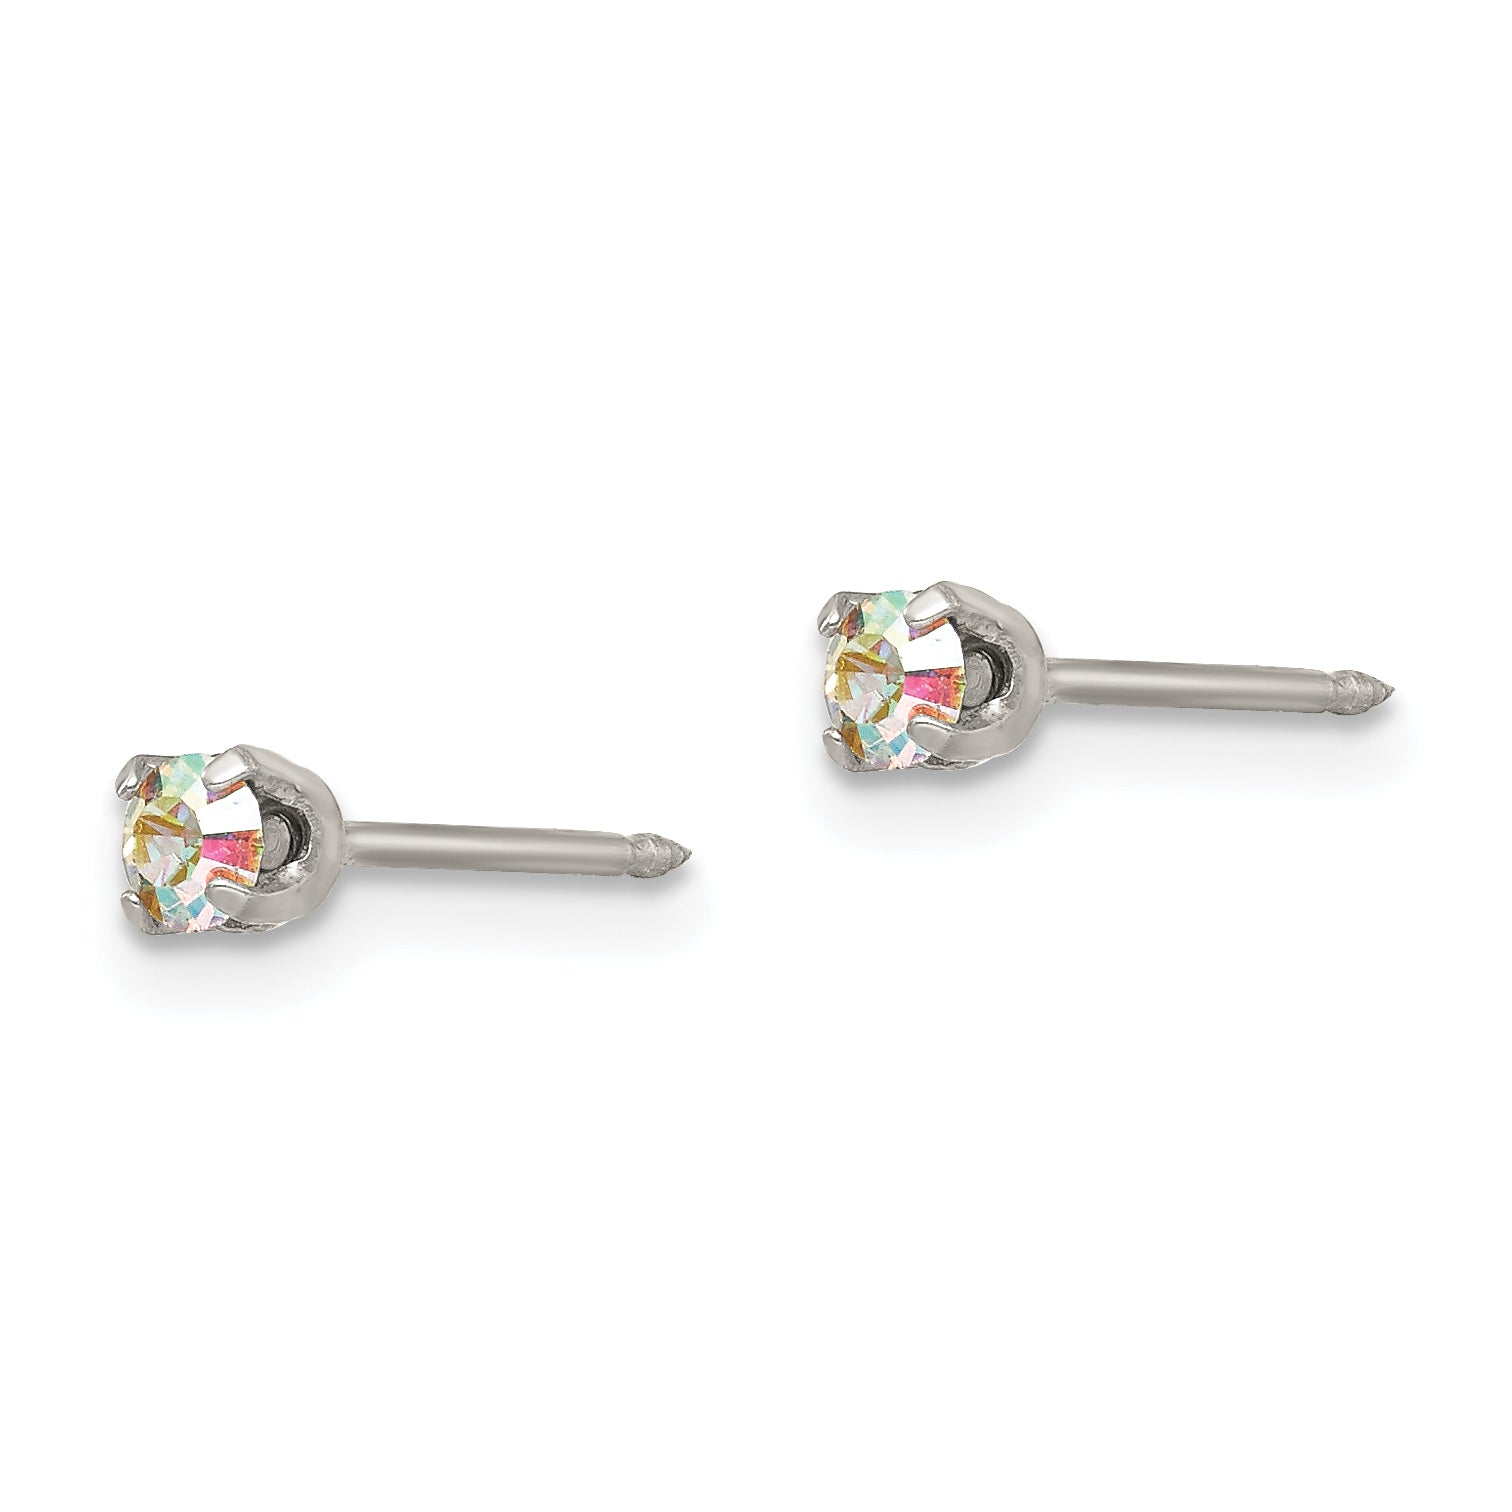 Inverness Stainless Steel 3mm Aurora Borealis Crystal Earrings